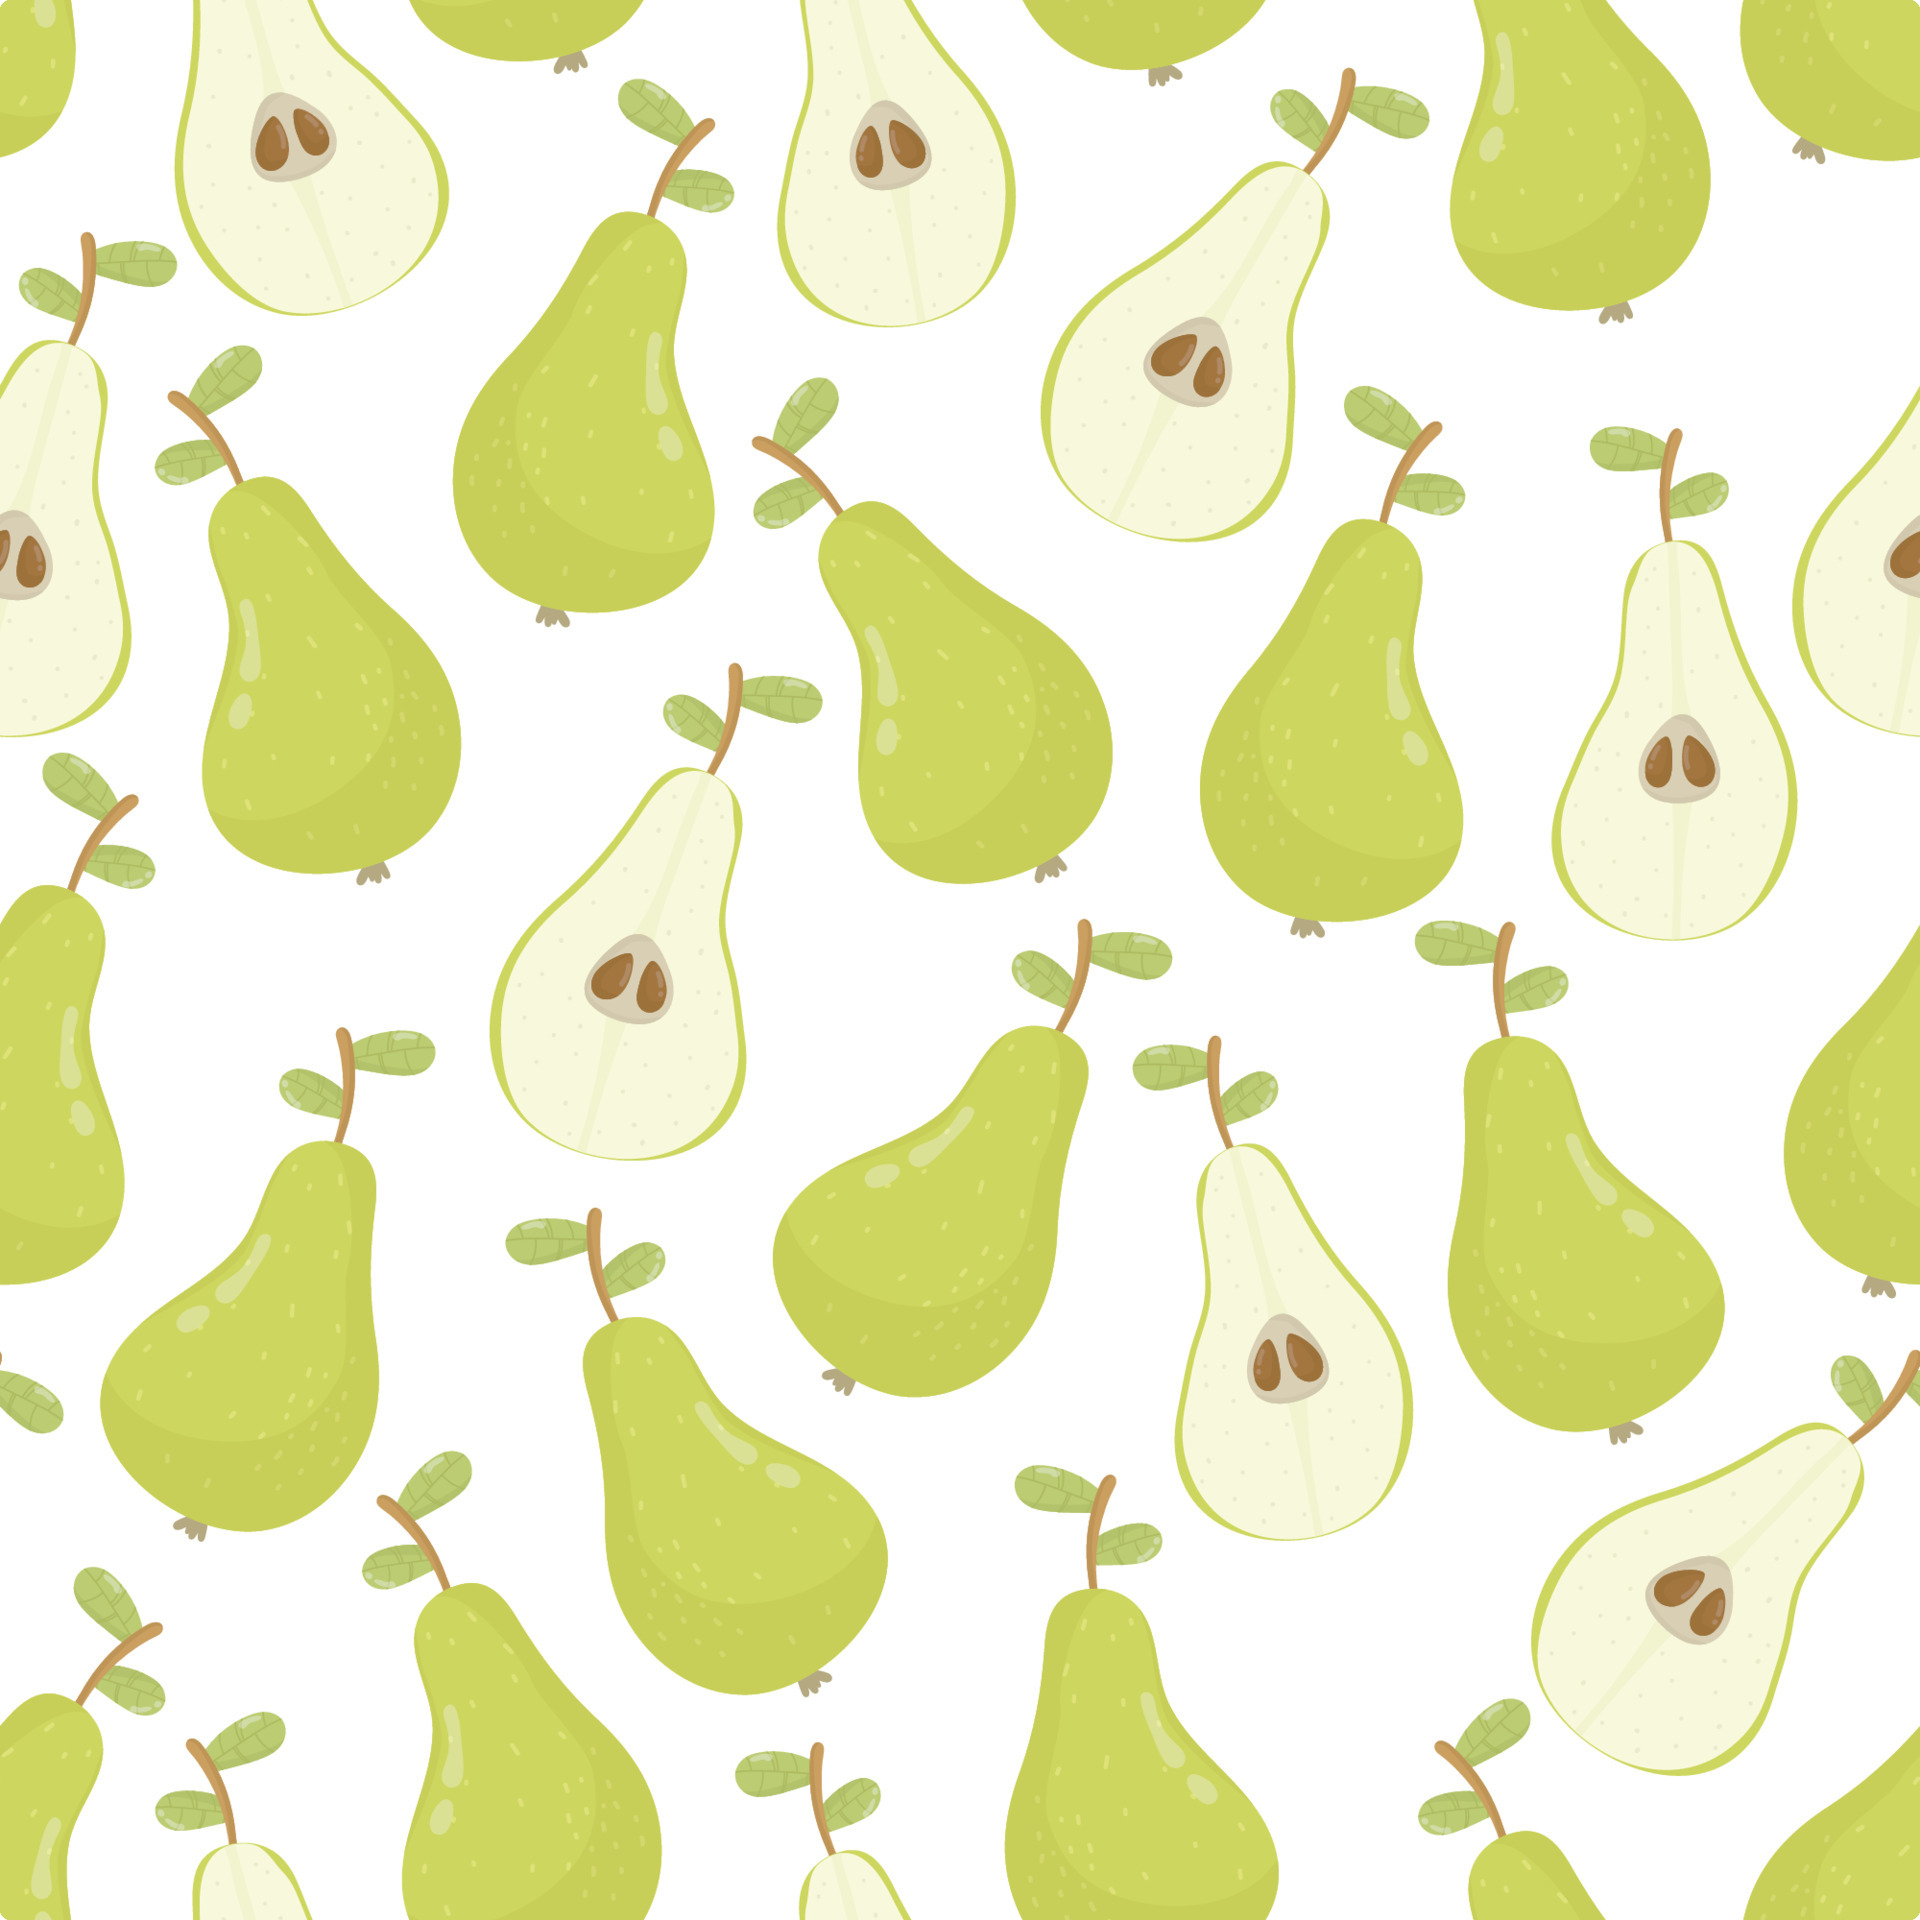 1920x1920 Fruit seamless pattern of pears with green foliage. Fresh tasty fruits. Background, wallpaper. for textile prints, posters or wrapping paper 4680350 Vector Art